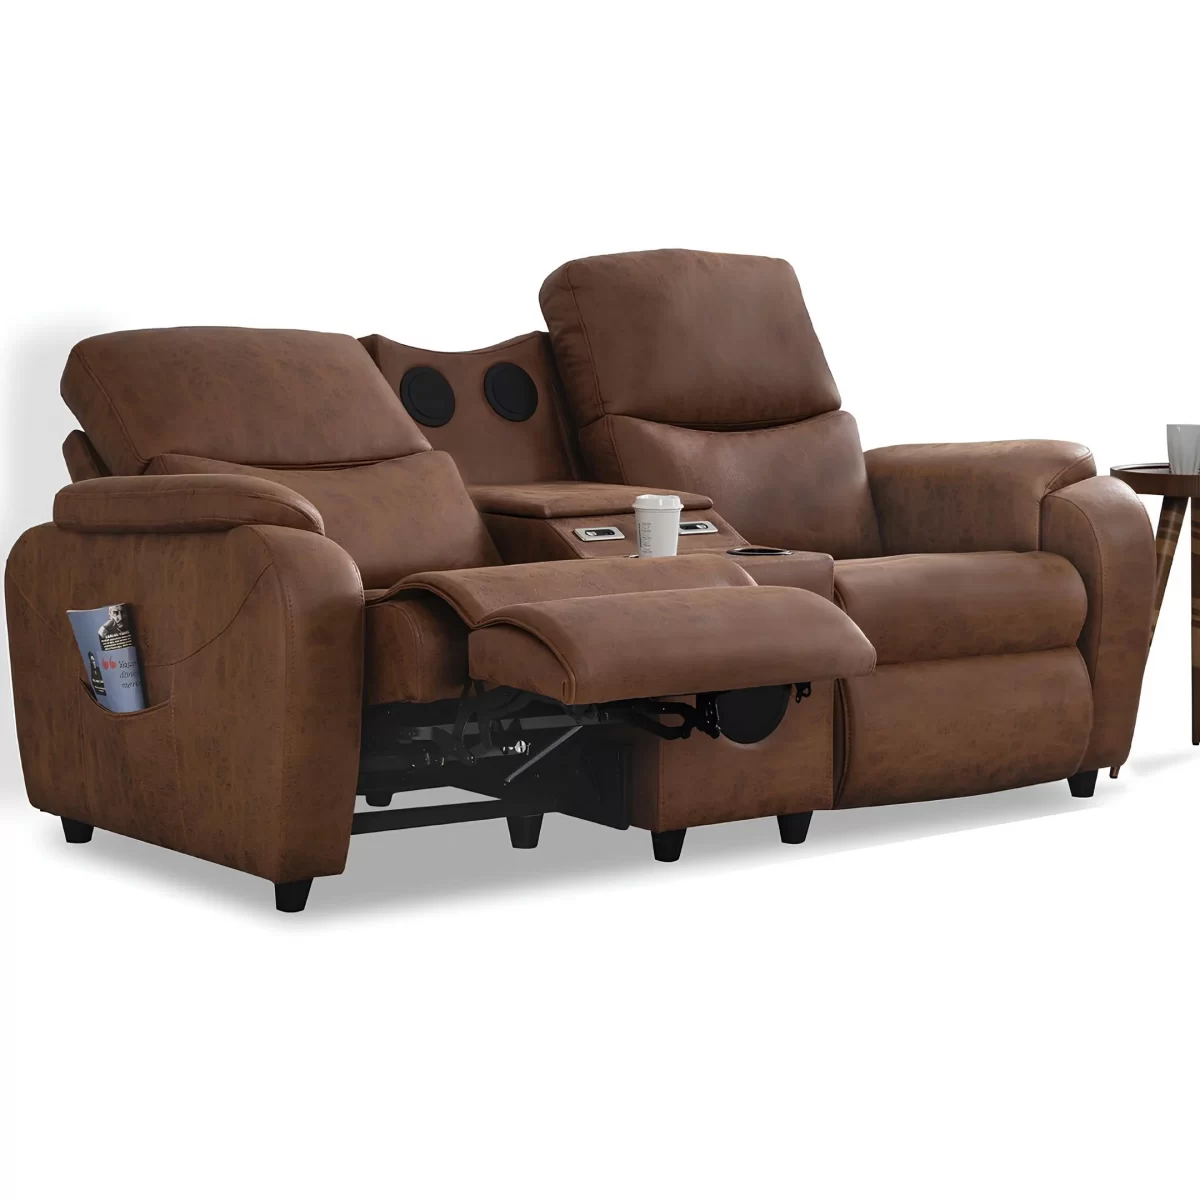 babil double reclining sofa electric recliner speakers usb ports cupholders 14